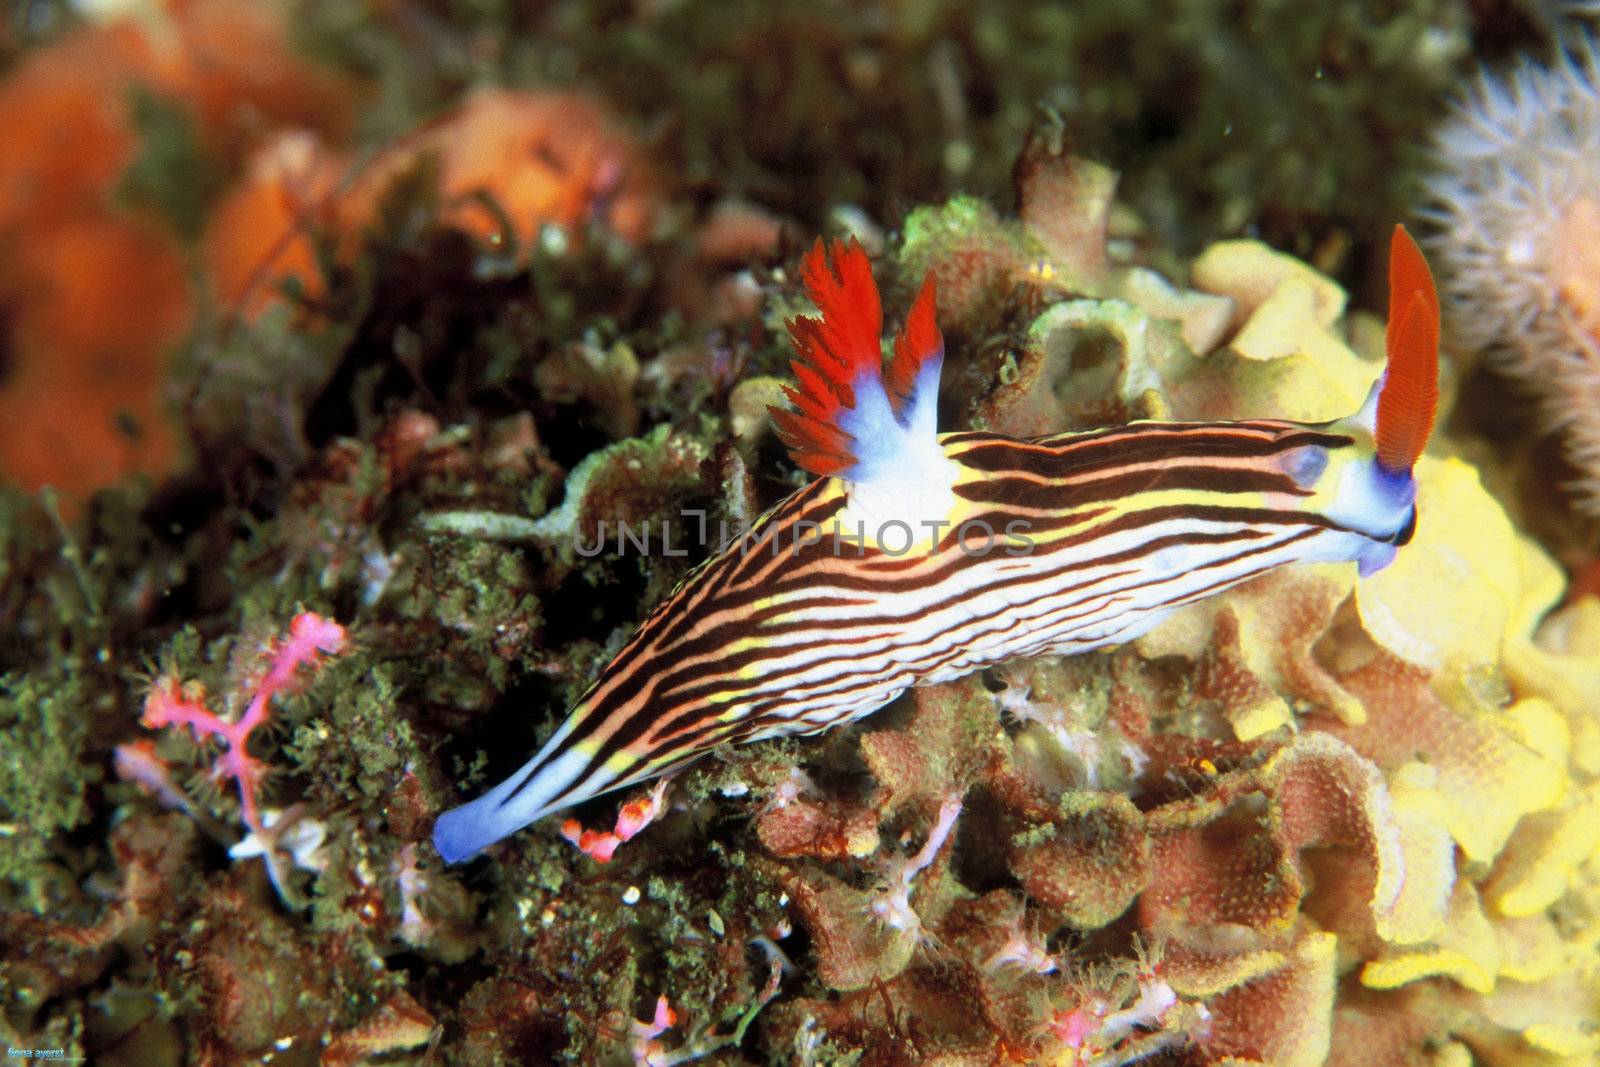 Nudibranch by fiona_ayerst